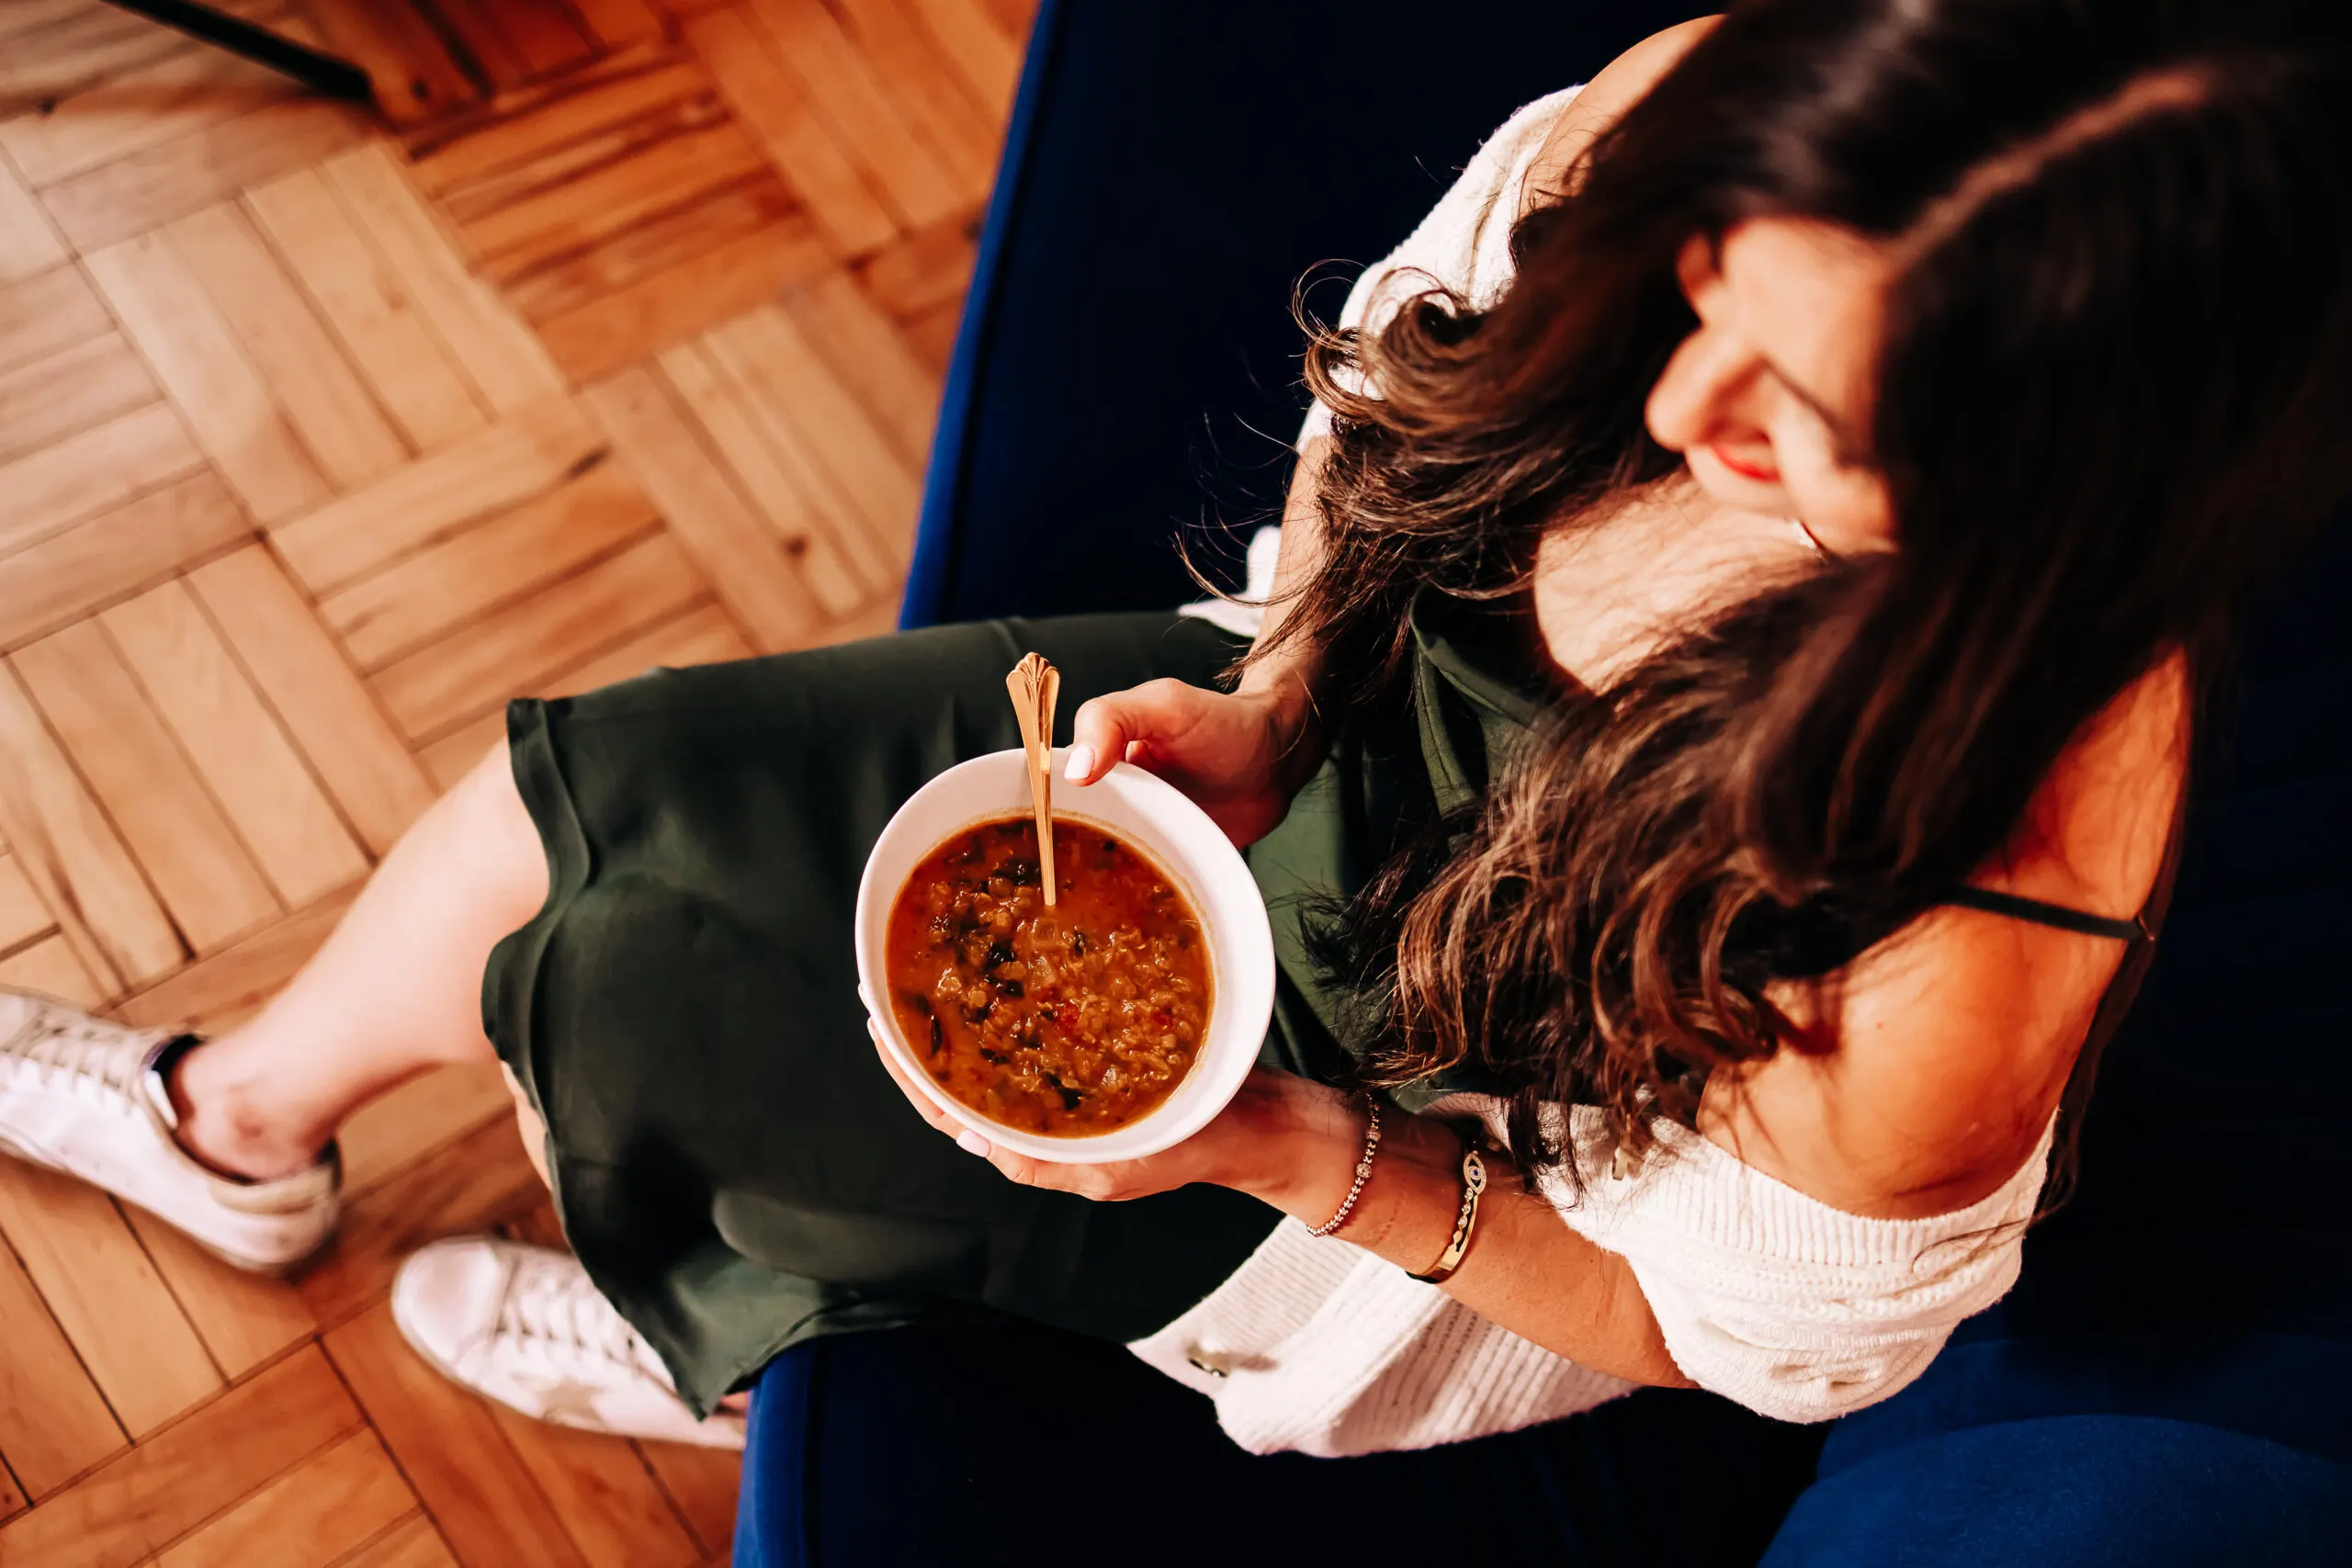 Whole Foods Red Lentil Dal Soup (copycat recipe) - The Fitnessista